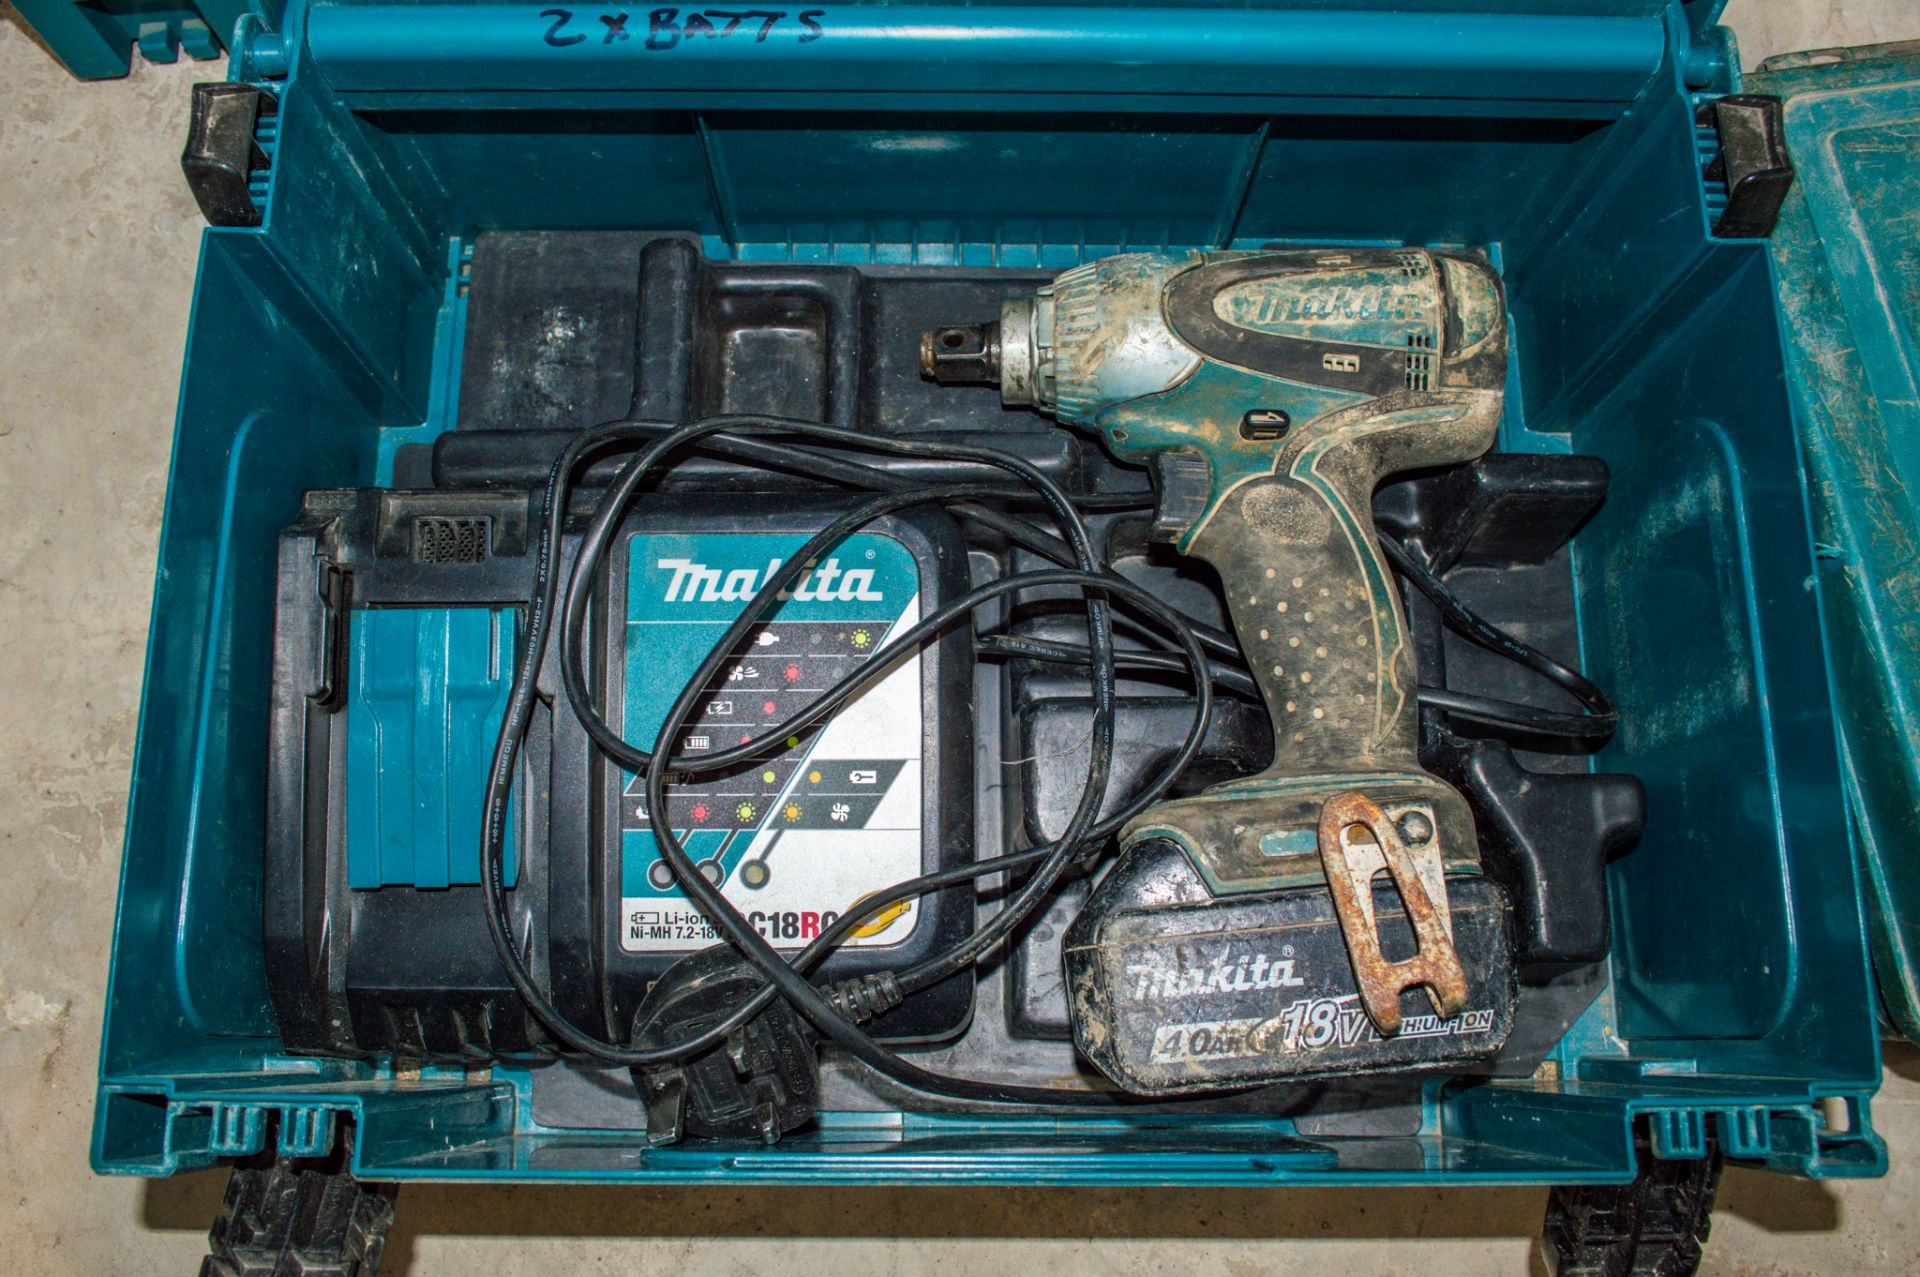 Makita 18v cordless 1/2" drive impact gun c/w battery, charger and carry case 18010366